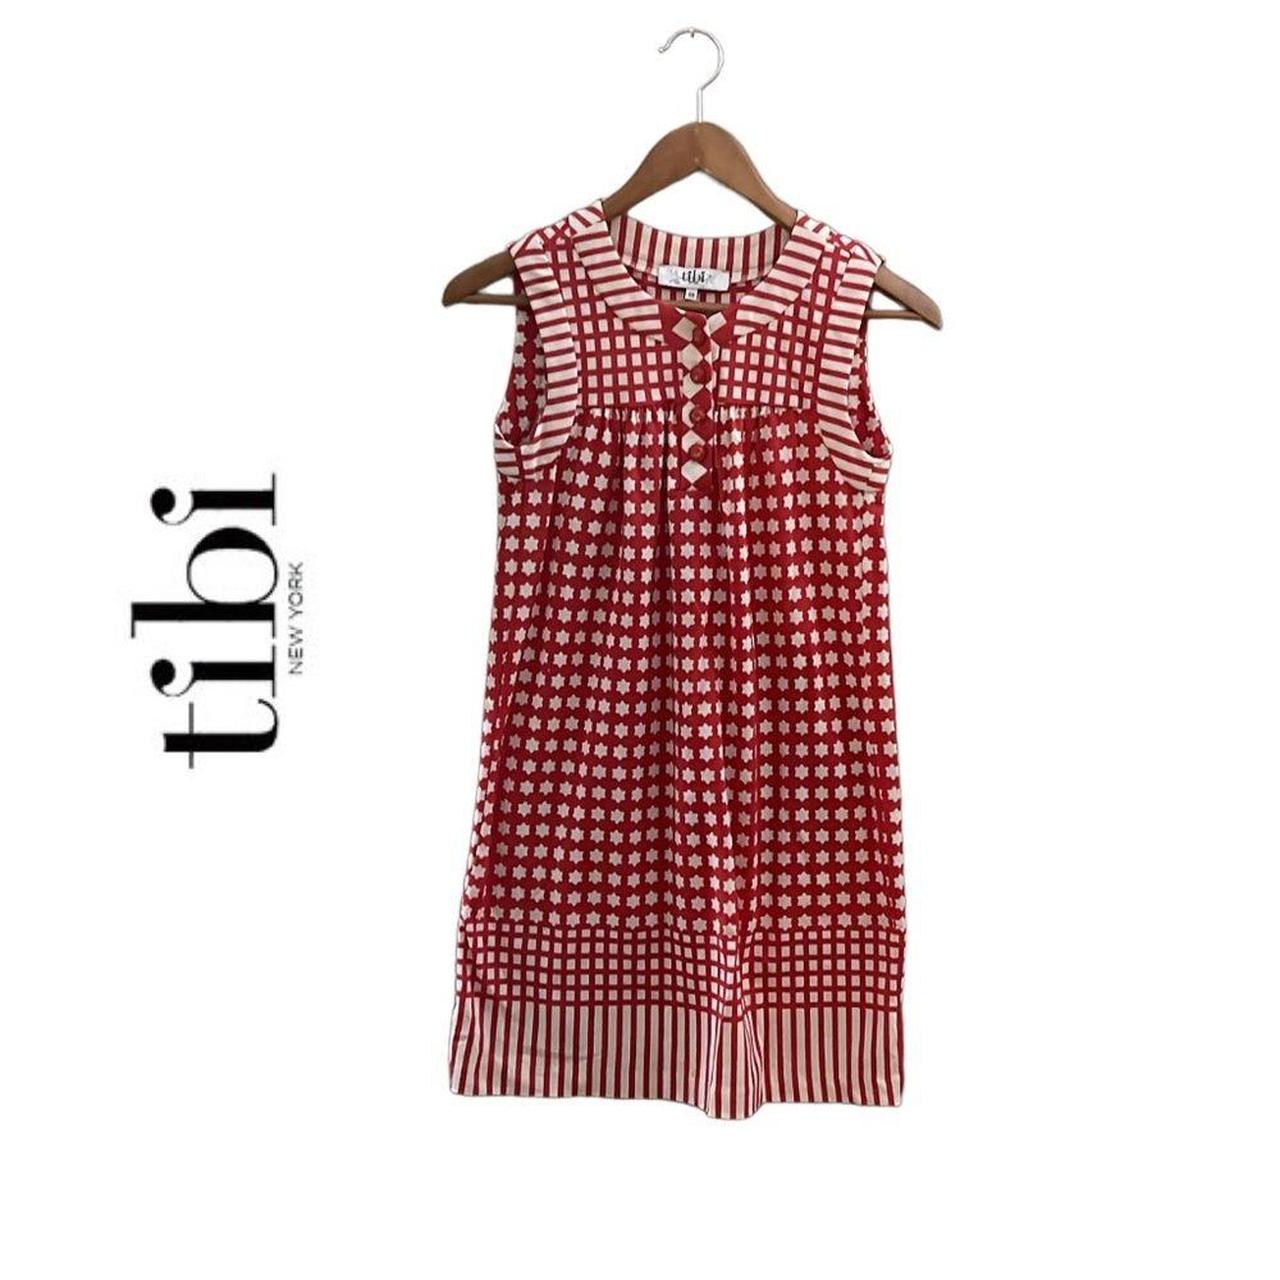 Product Image 1 - Brand: Tibi
Department: Womens
Color: Red White
Size: